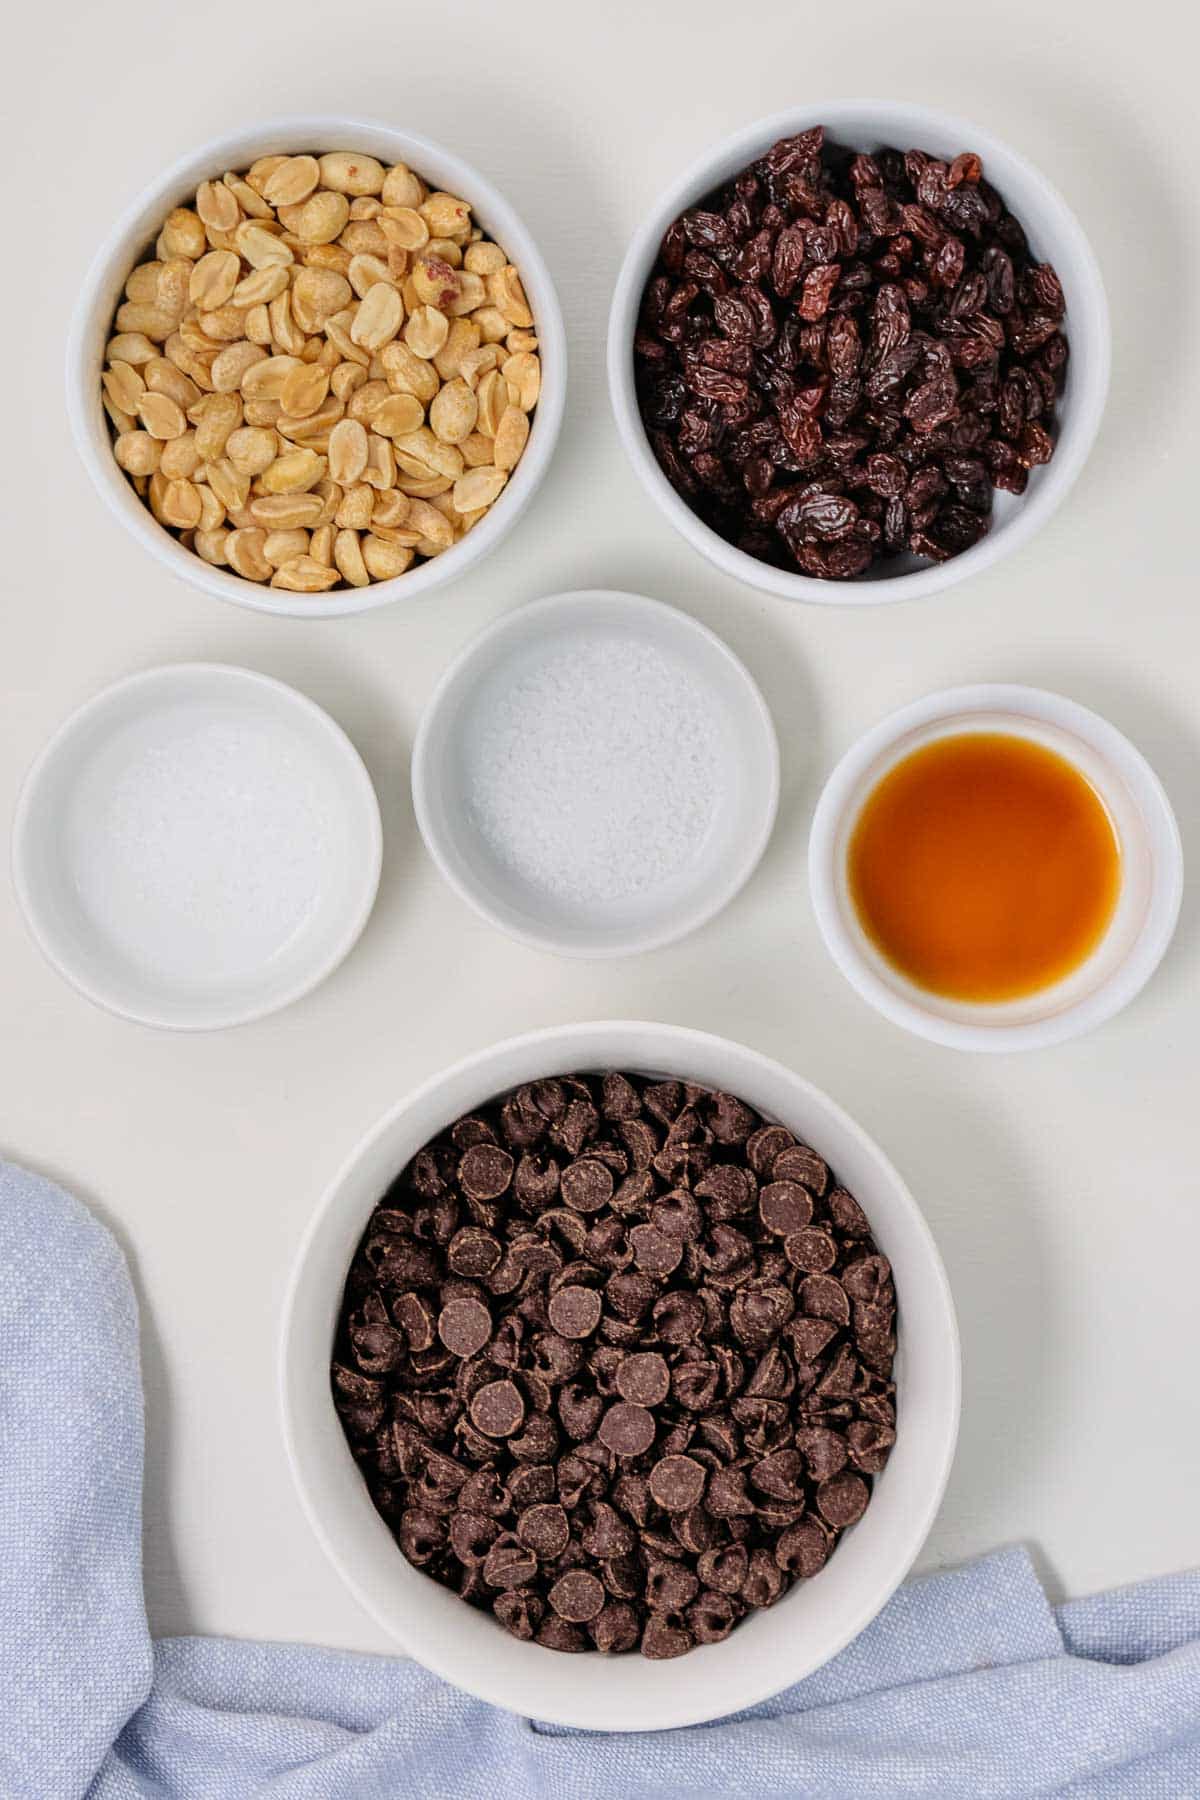 several white bowls with ingredients for chocolate covered peanuts - chocolate chips, peanuts, raisins, salt and vanilla extract.